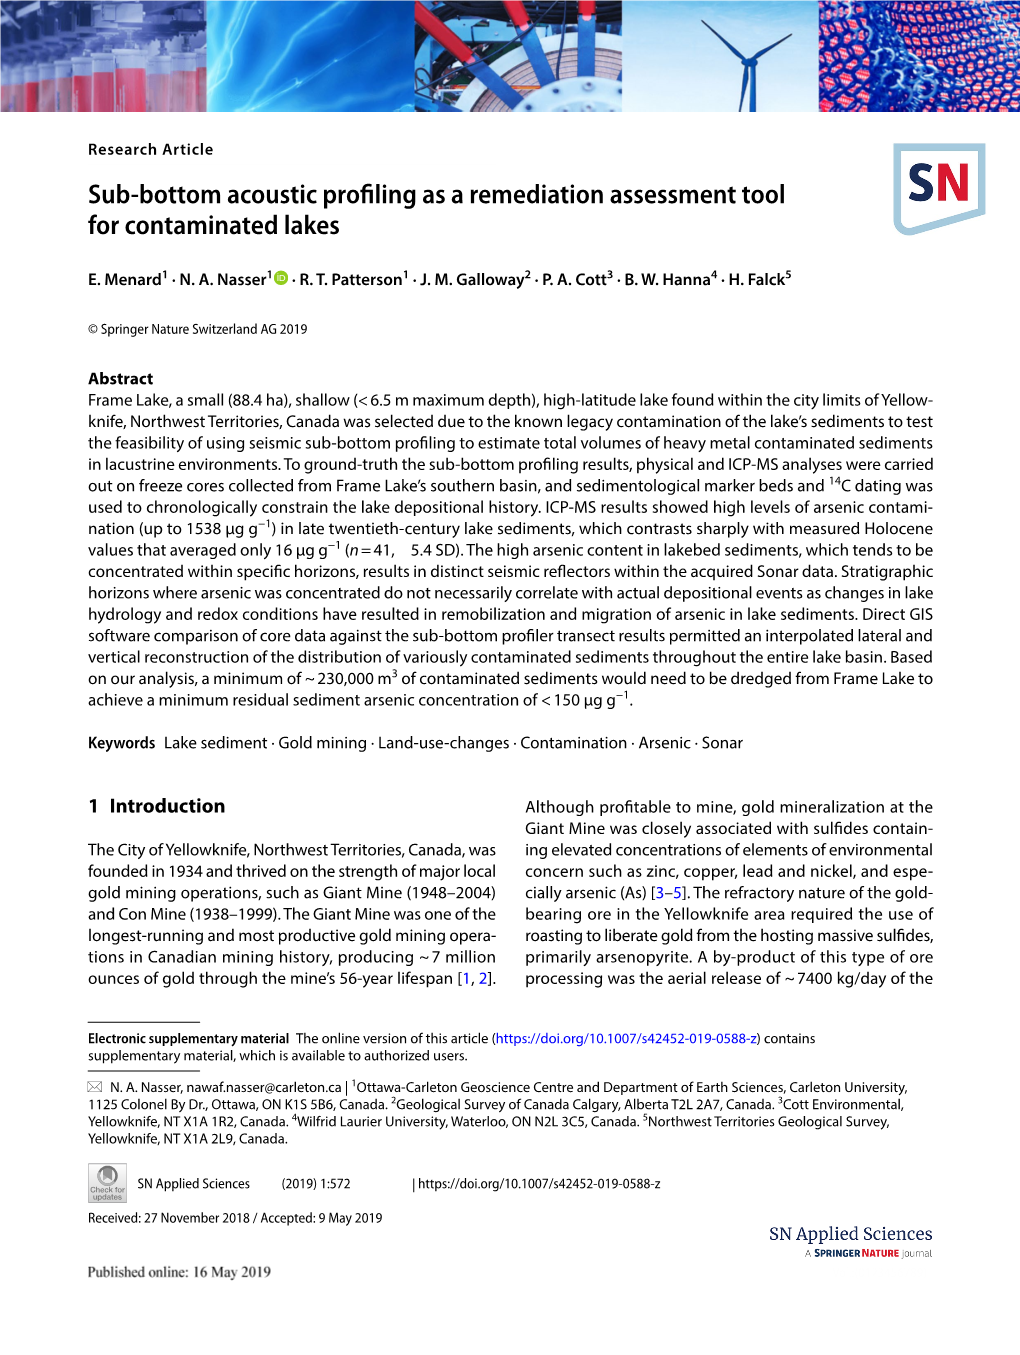 Sub-Bottom Acoustic Profiling As a Remediation Assessment Tool For